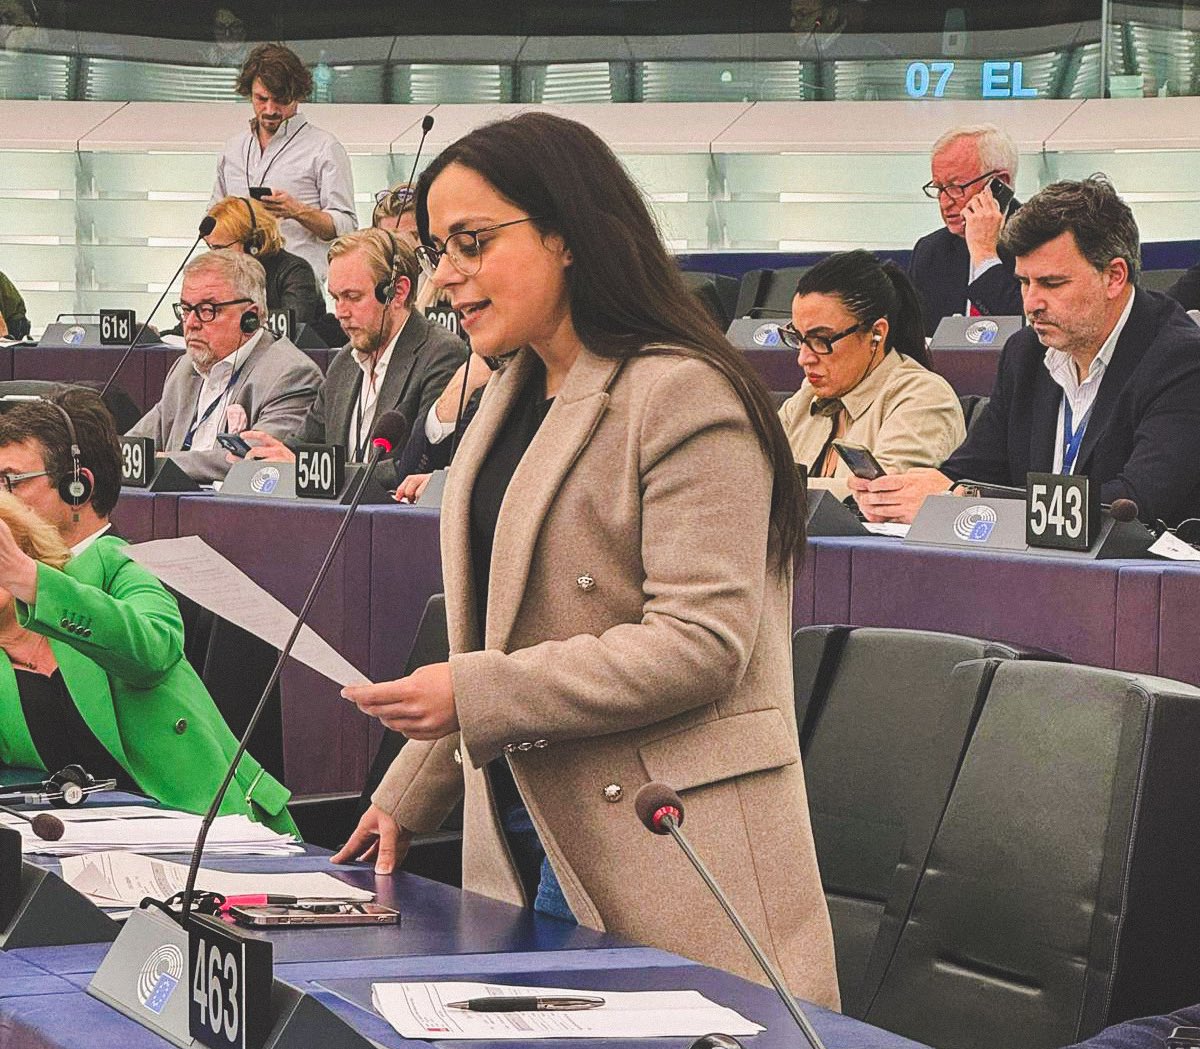 Final plenary, final file! Proud of this solid result for a cybersecure #EU on the Managed Security Services targeted amendment I led as Rapporteur. Honoured to have played my part towards an inclusive, high skilled, & safe digital transition for all! @TheProgressives